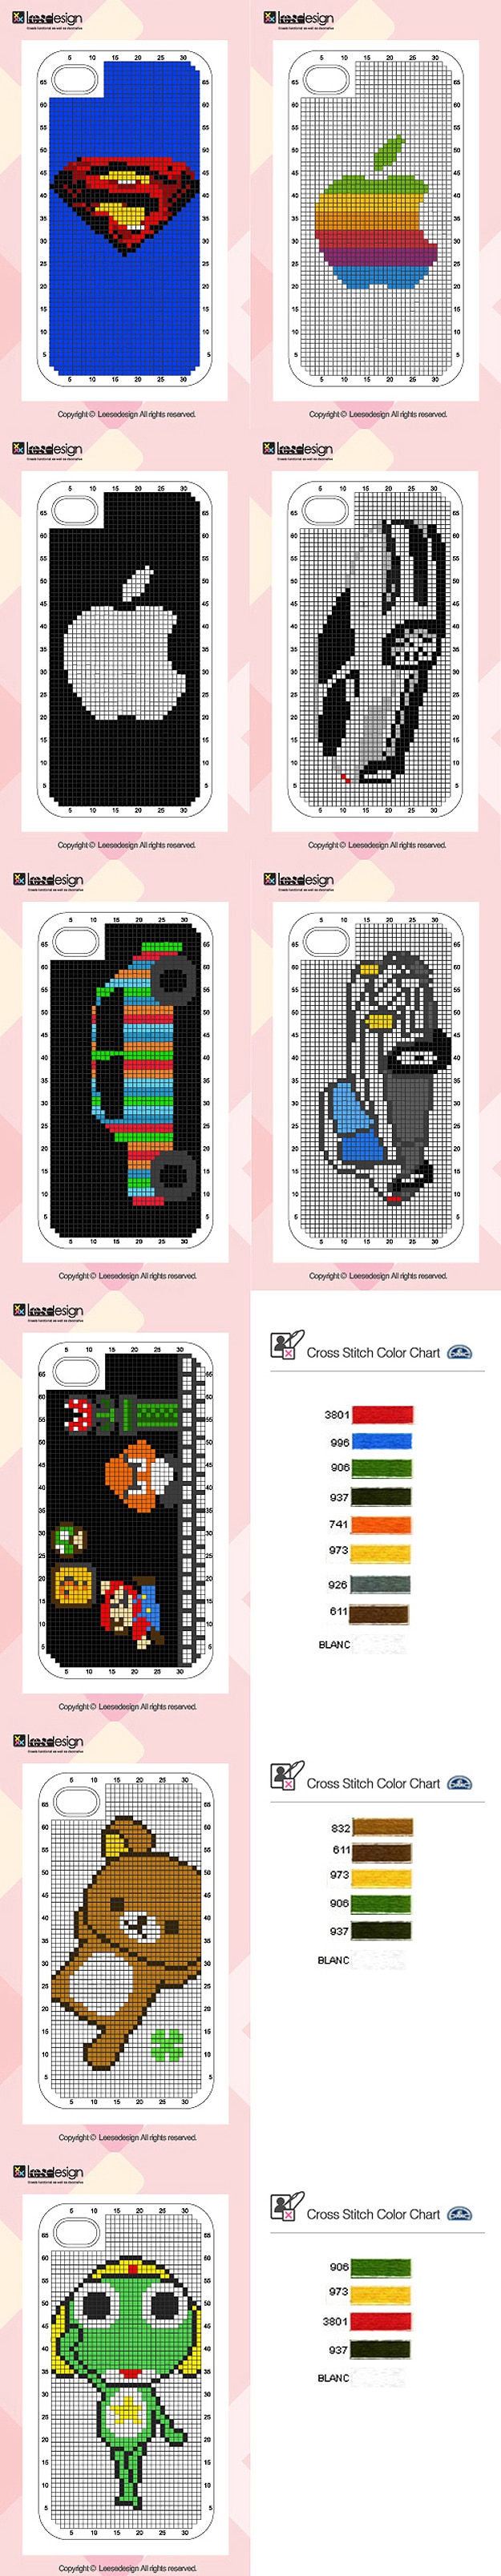 How To: Cross-Stitch Your Own iPhone Case